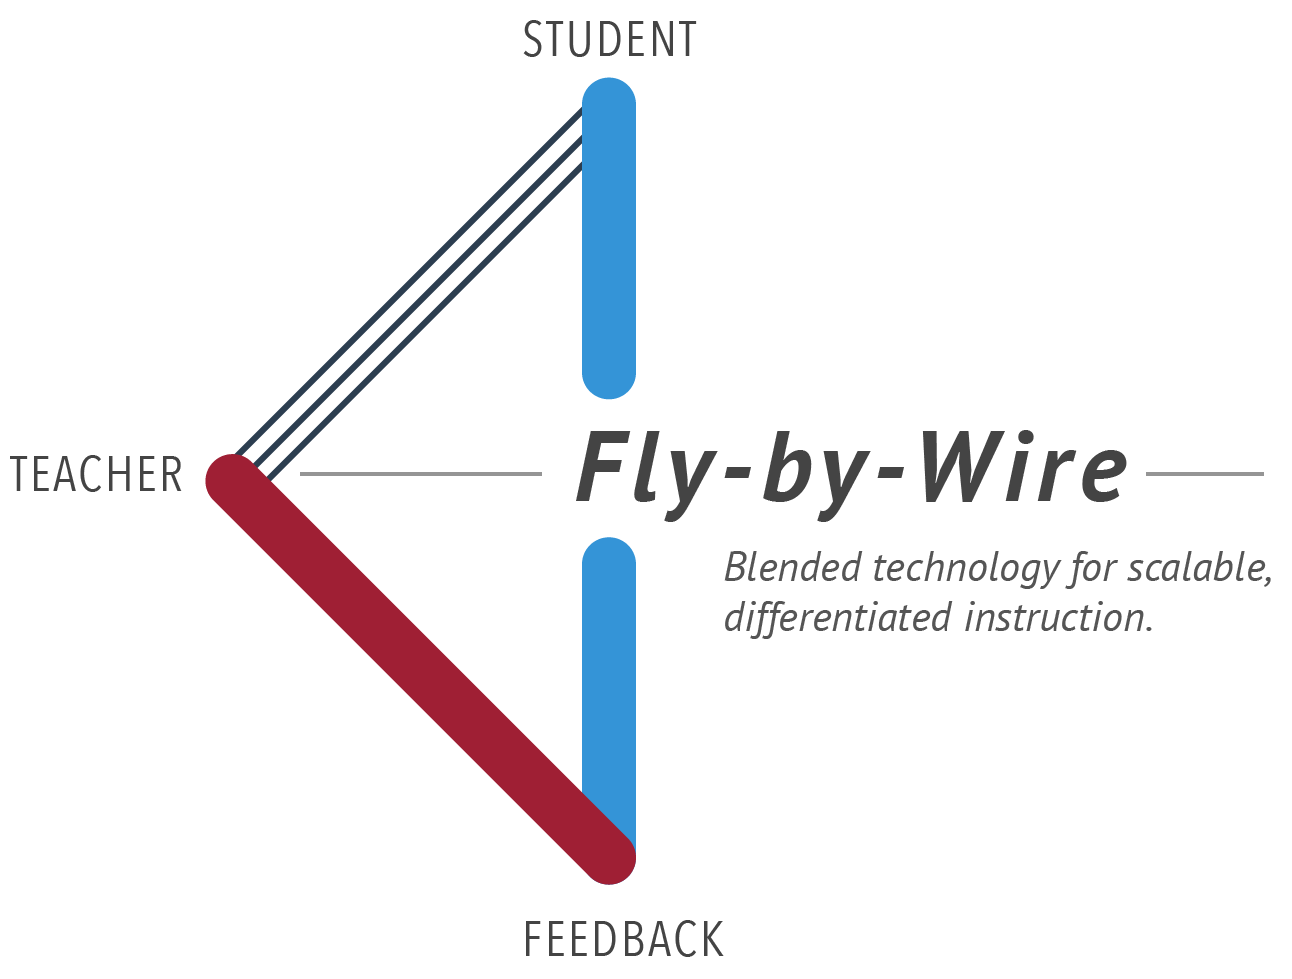 Fly-by-Wire aerospace-inspired education technology